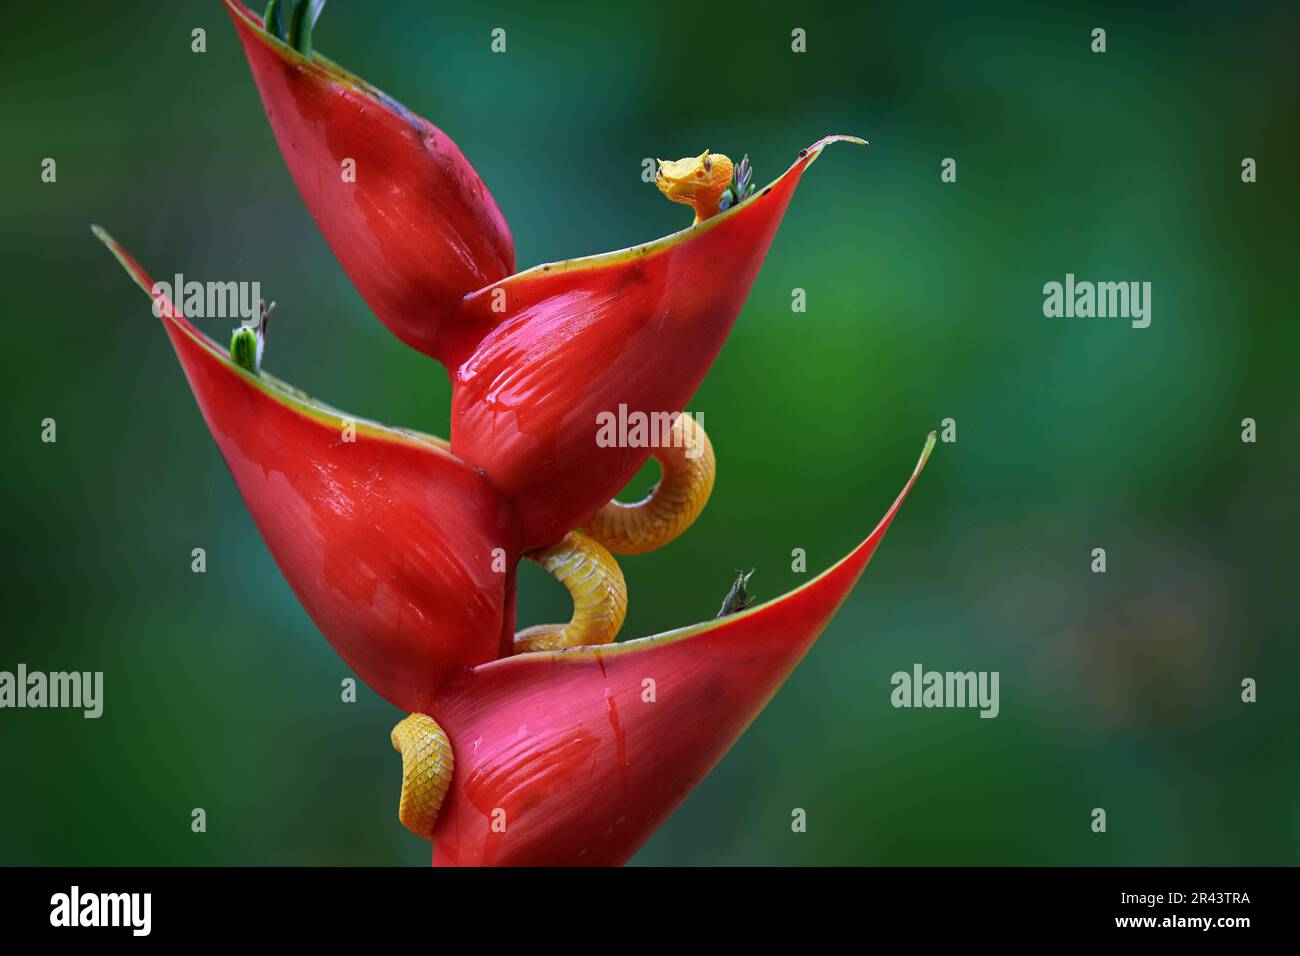 Snake from Ecuador. Bothriechis schlegeli, Yellow Eyelash Palm Pitviper, on the red wild flower. Wildlife scene from tropic forest. Bloom with snake. Stock Photo